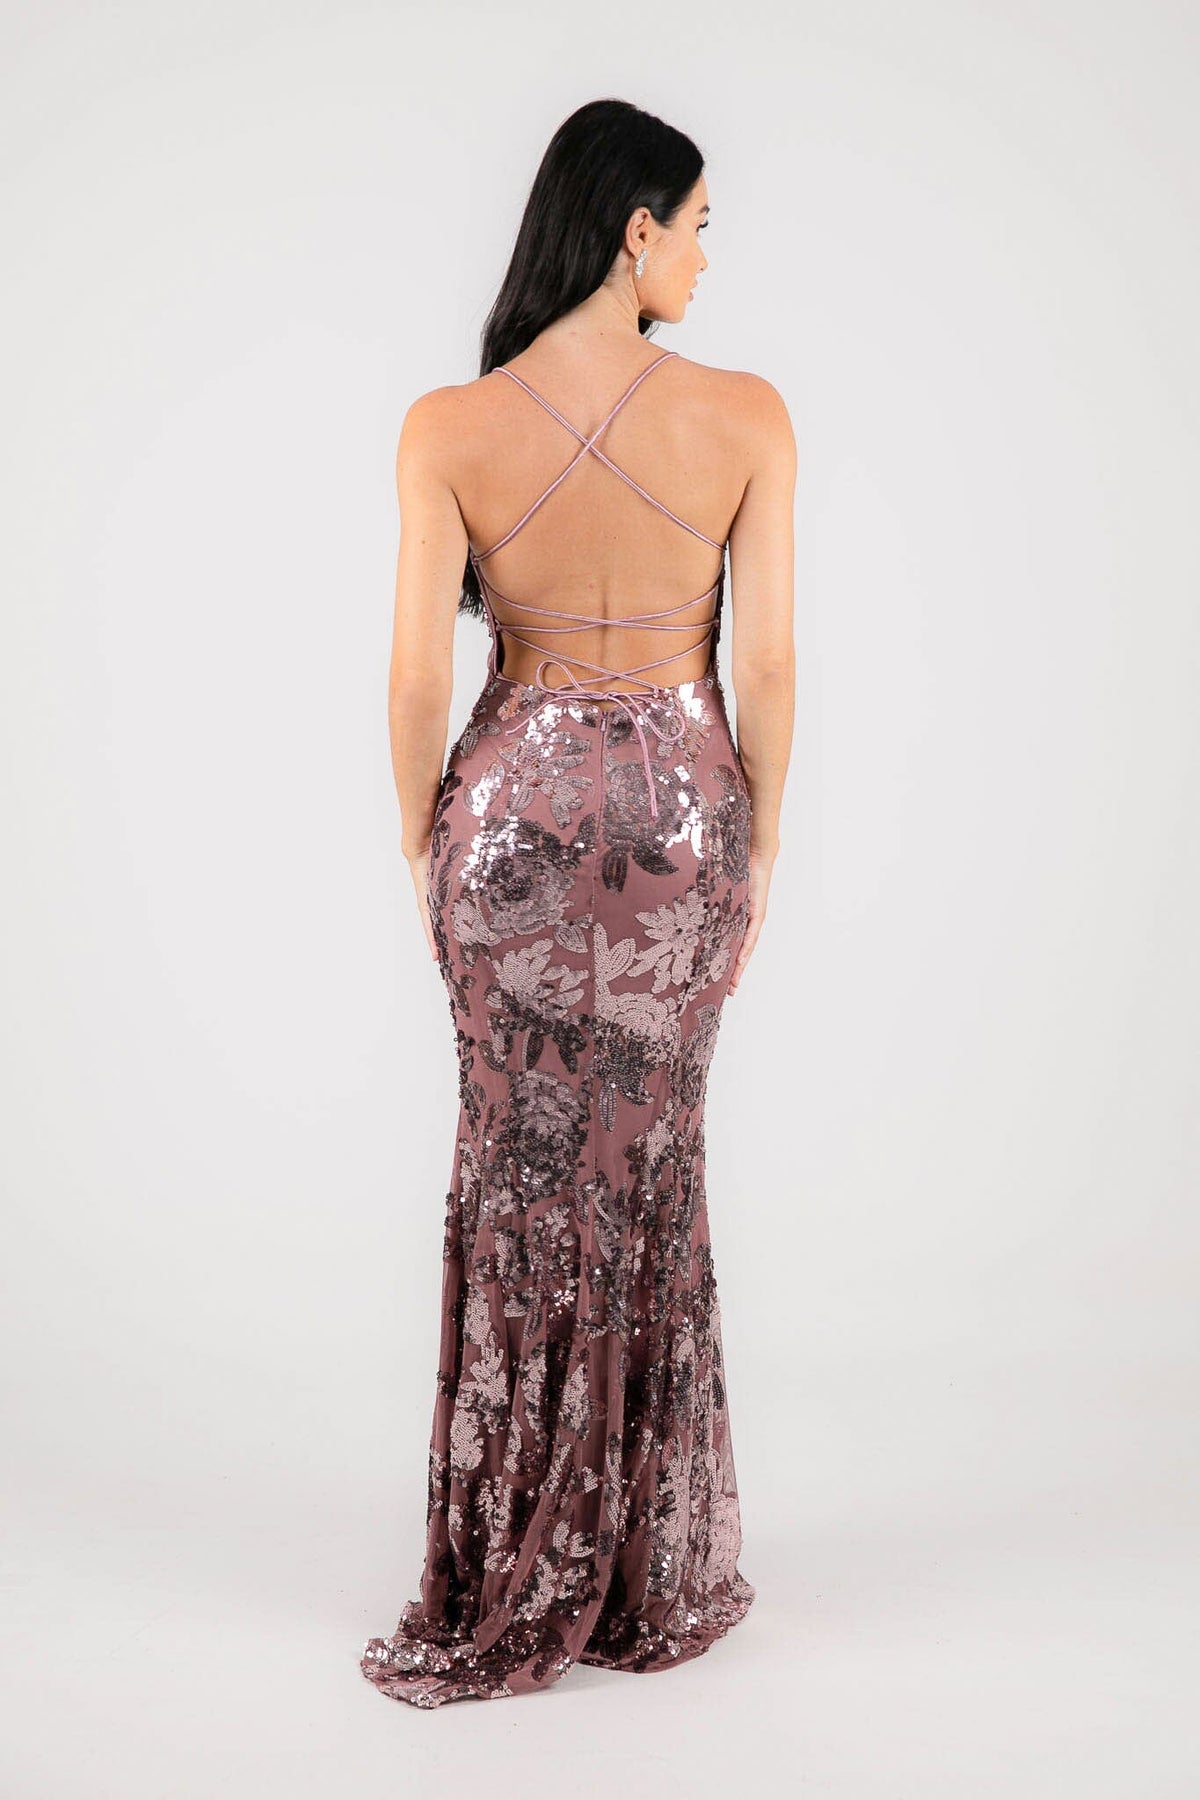 Lace Up Open Back of Dusty Rose Floral Sequin Embellished Fitted Evening Formal Gown